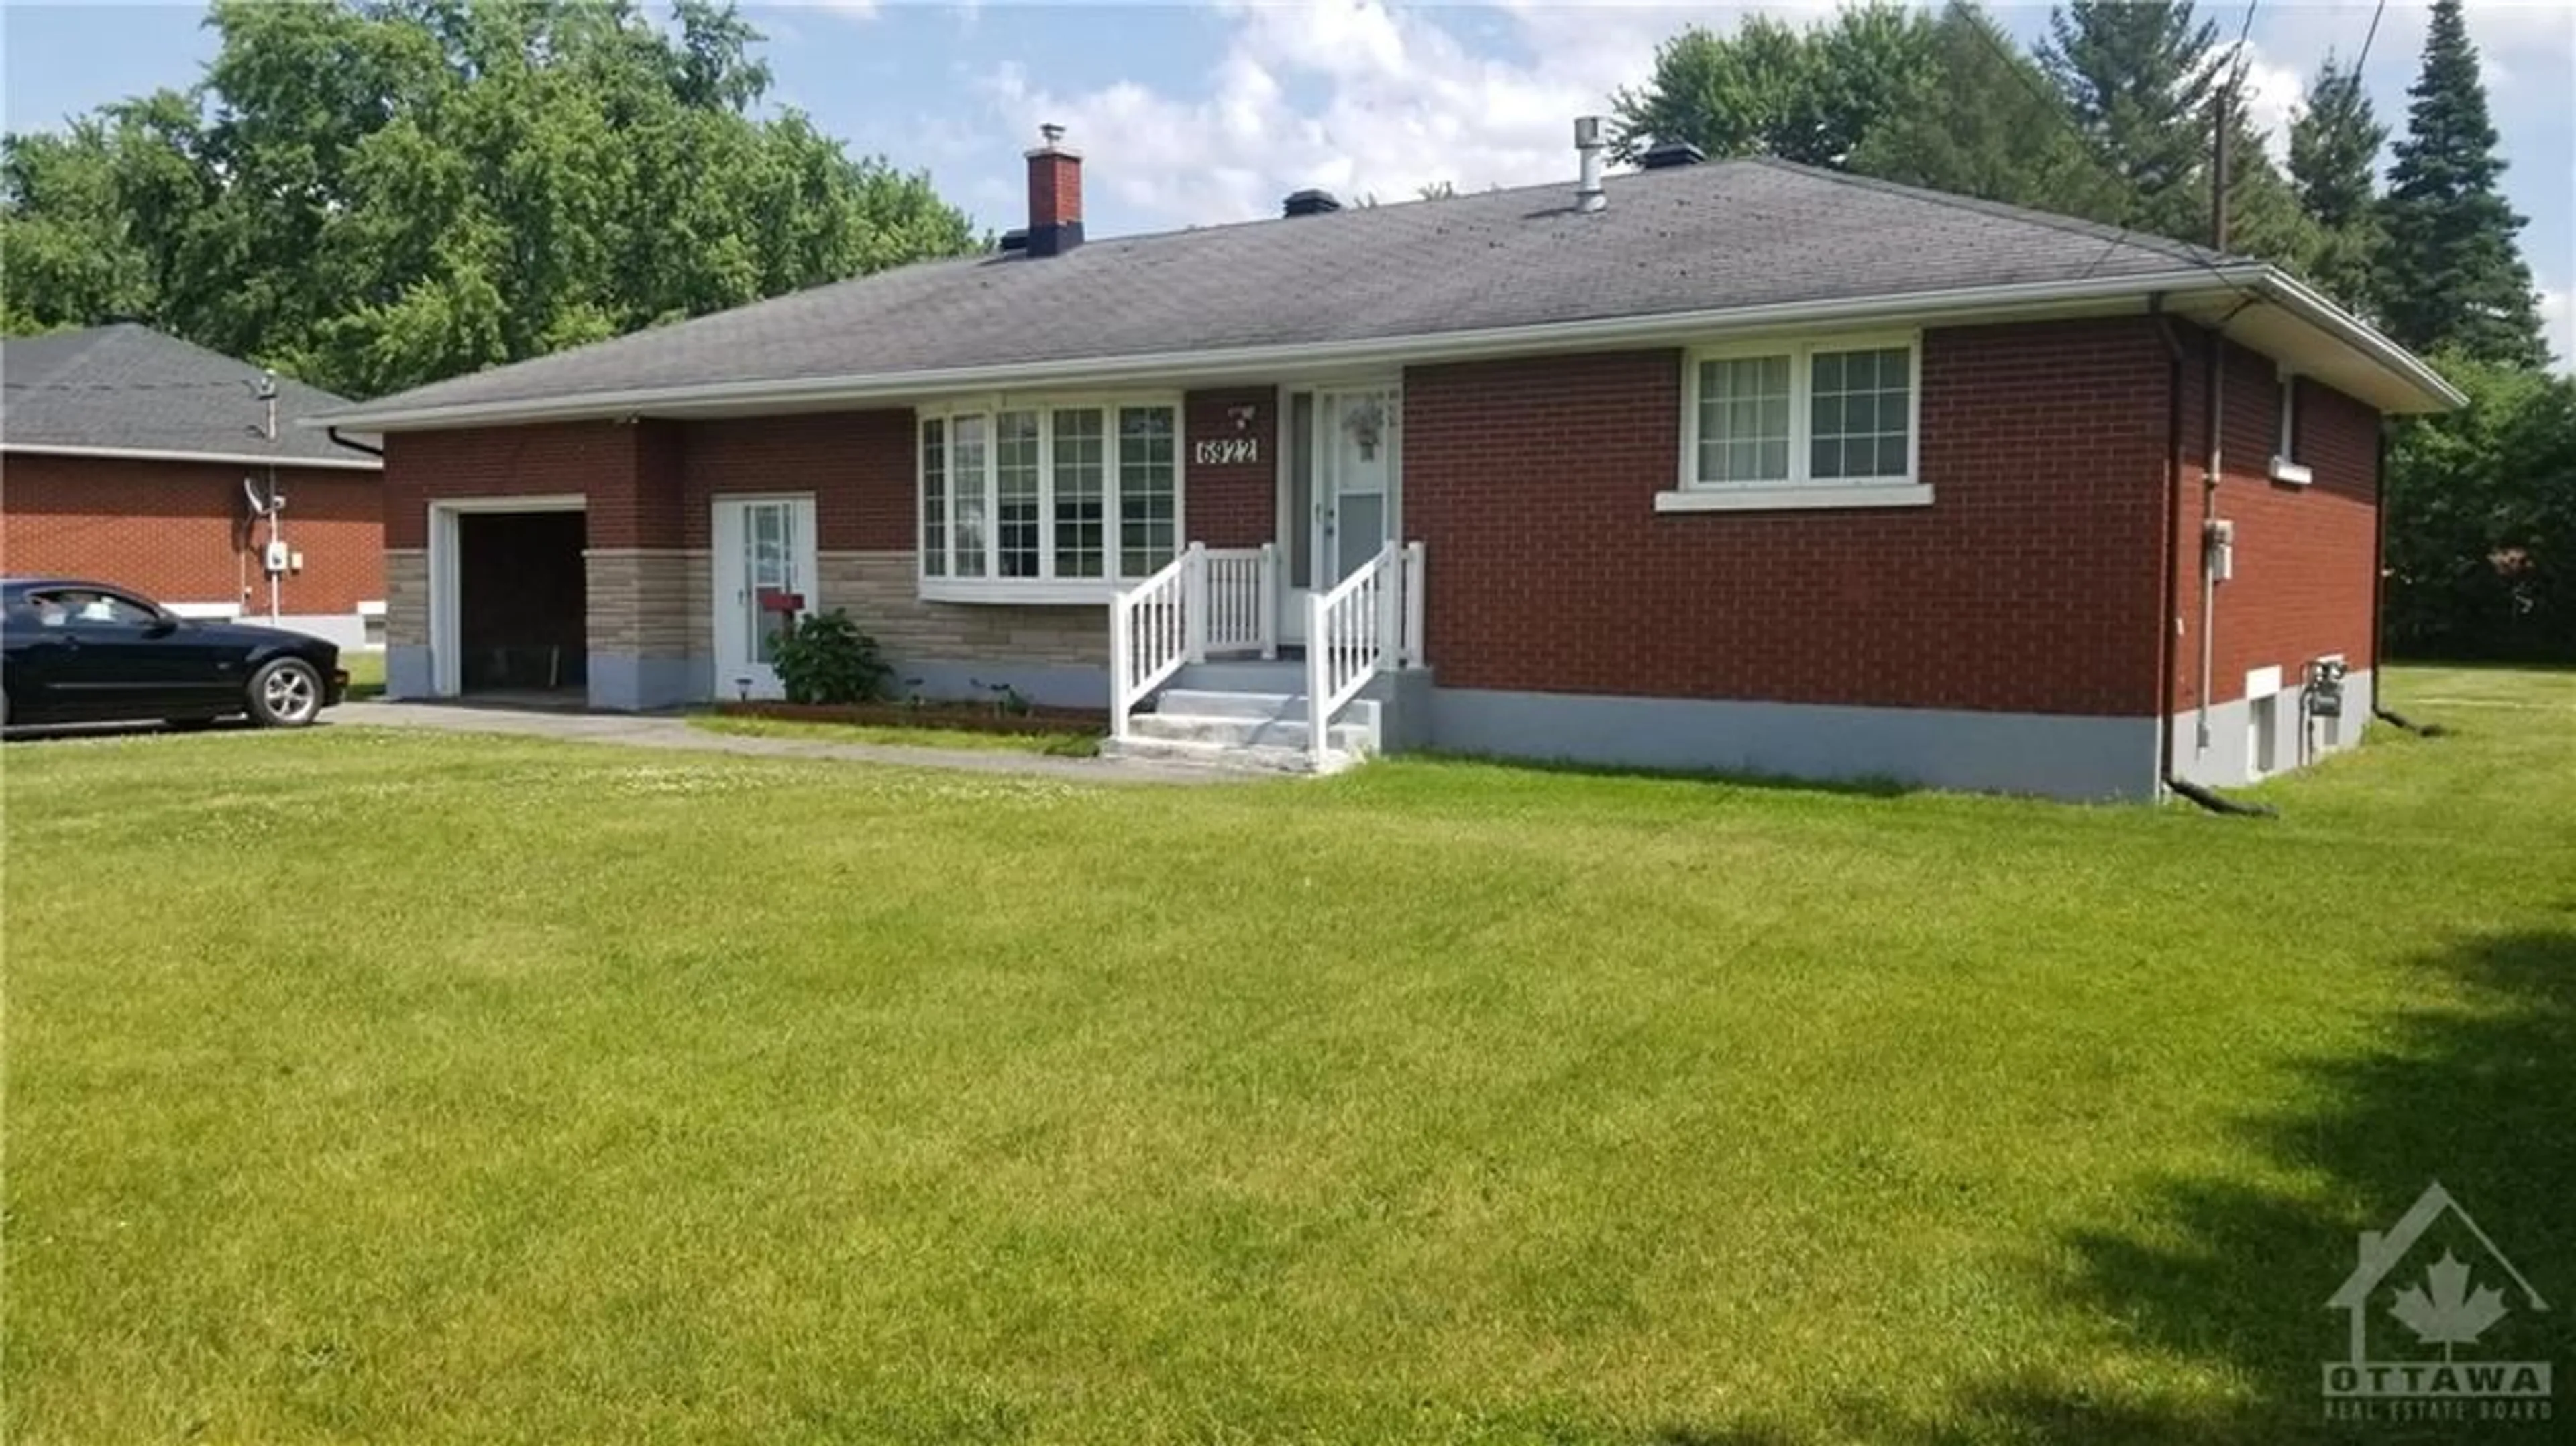 Frontside or backside of a home for 6922 MITCH OWENS Rd, Greely Ontario K4P 1C5